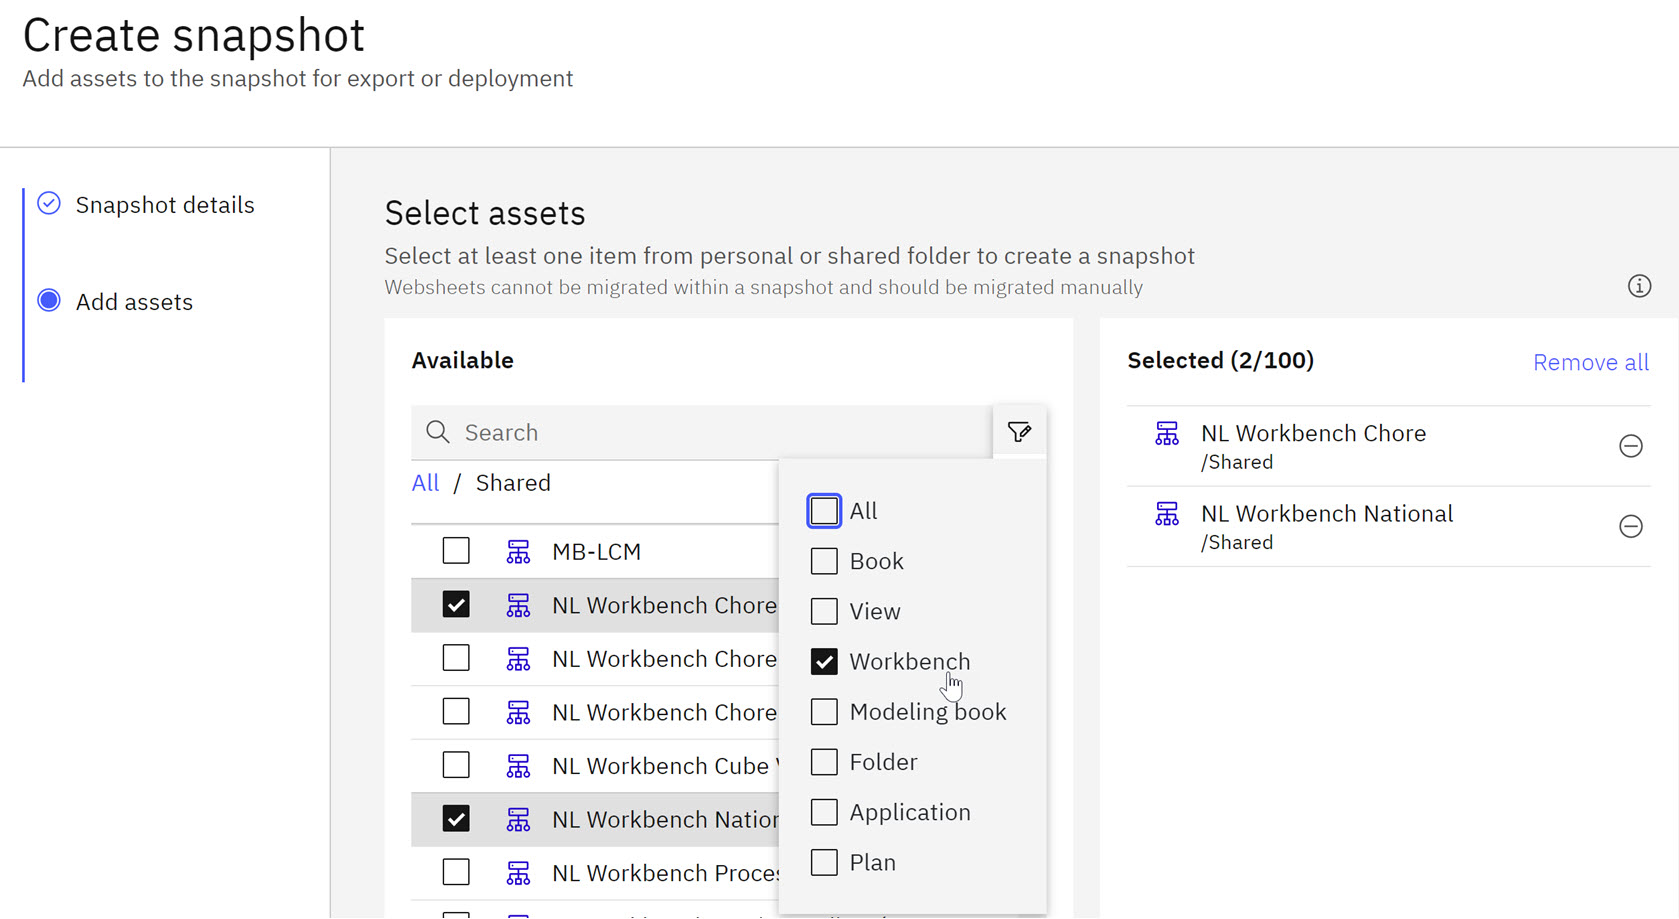 Workbenches shown as available assets in a snapshot